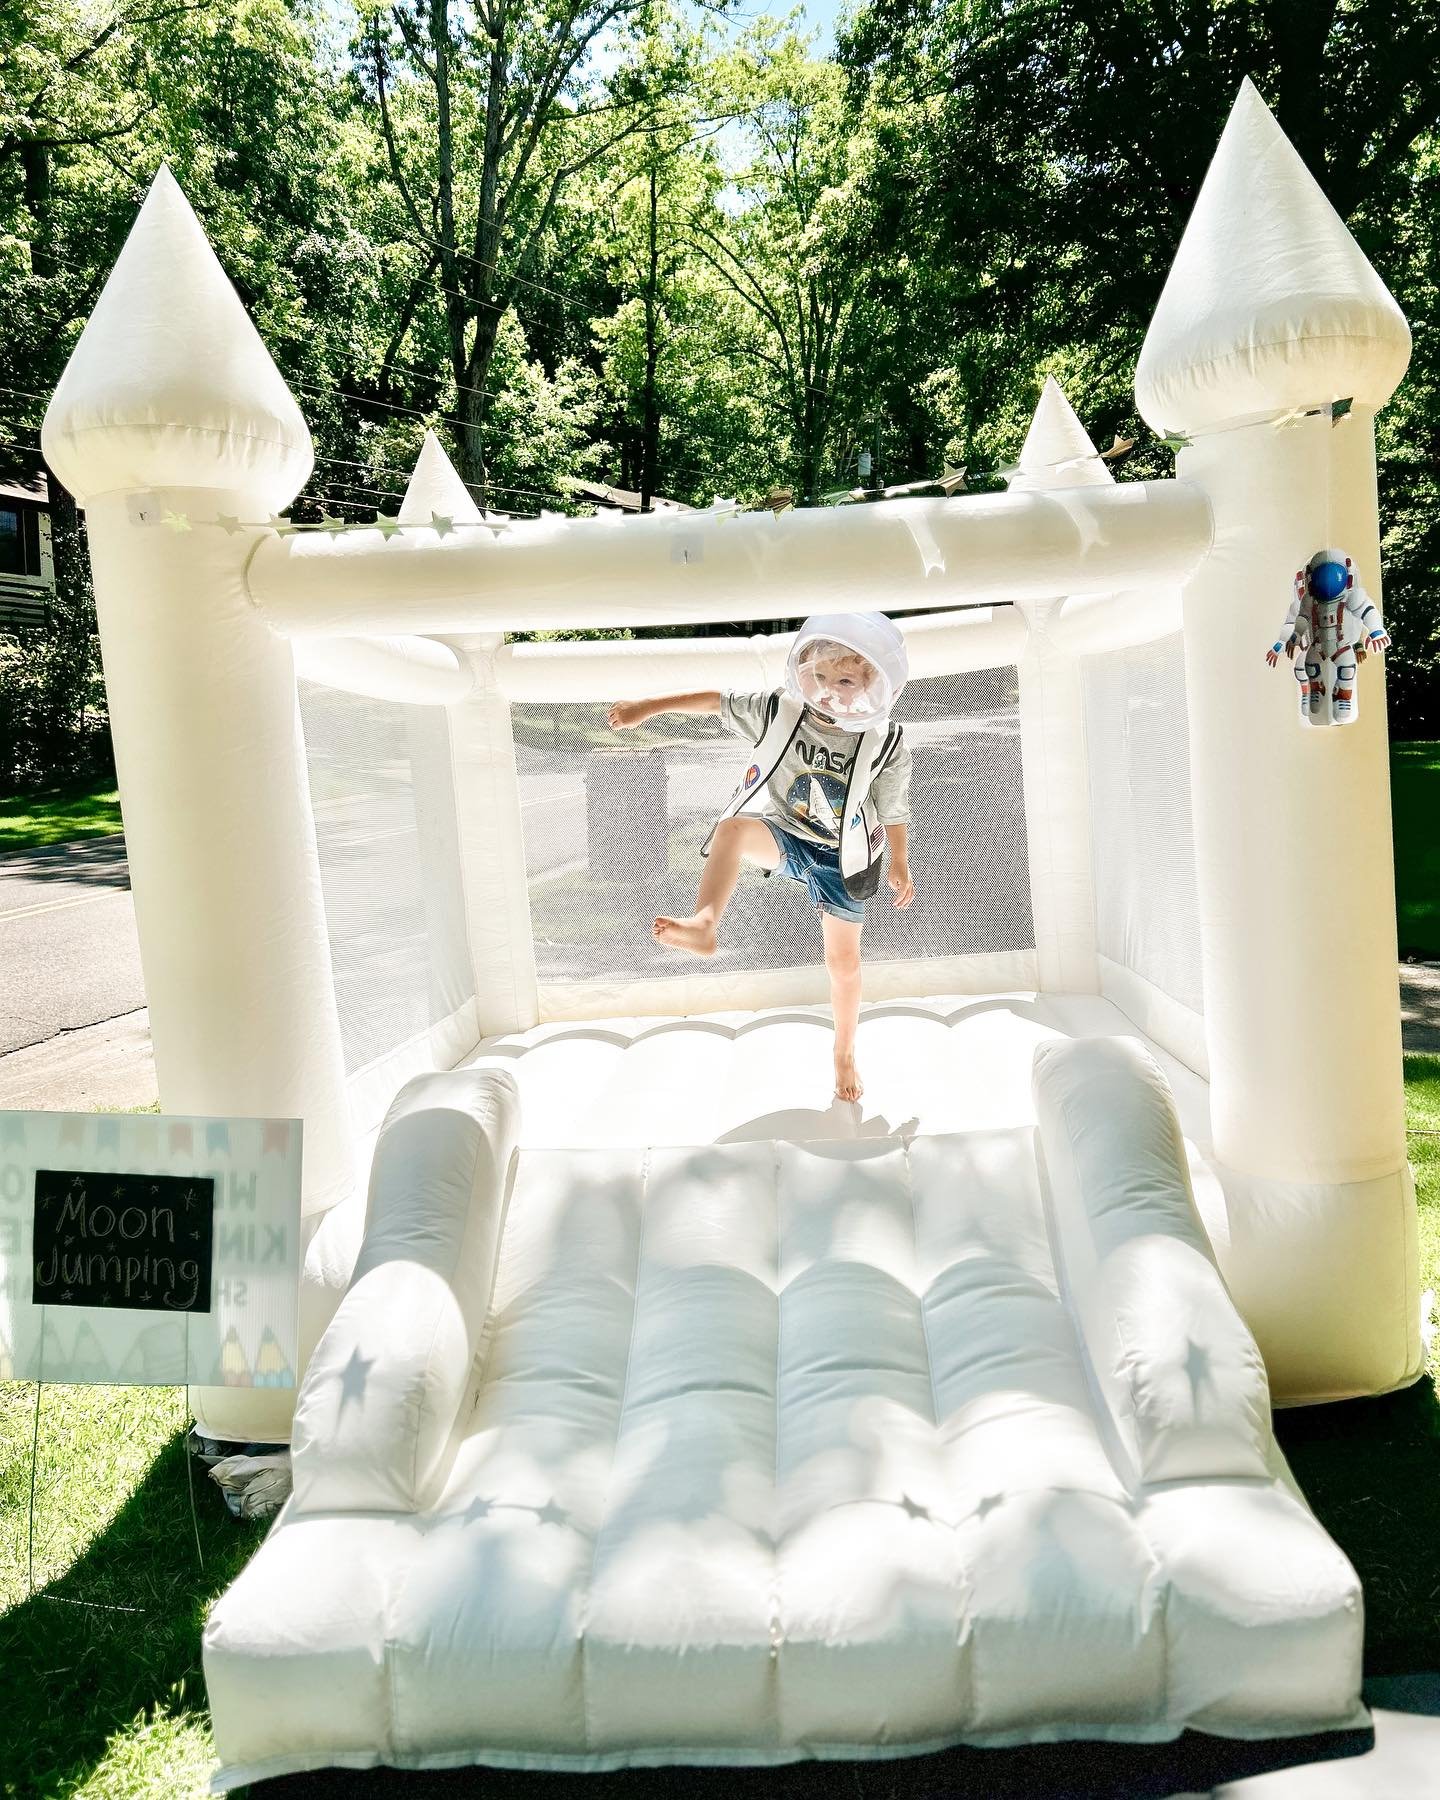 This little astronaut blasted off with fun in our mini bounce house! Perfect for the smallest jumpers. 😍👩&zwj;🚀